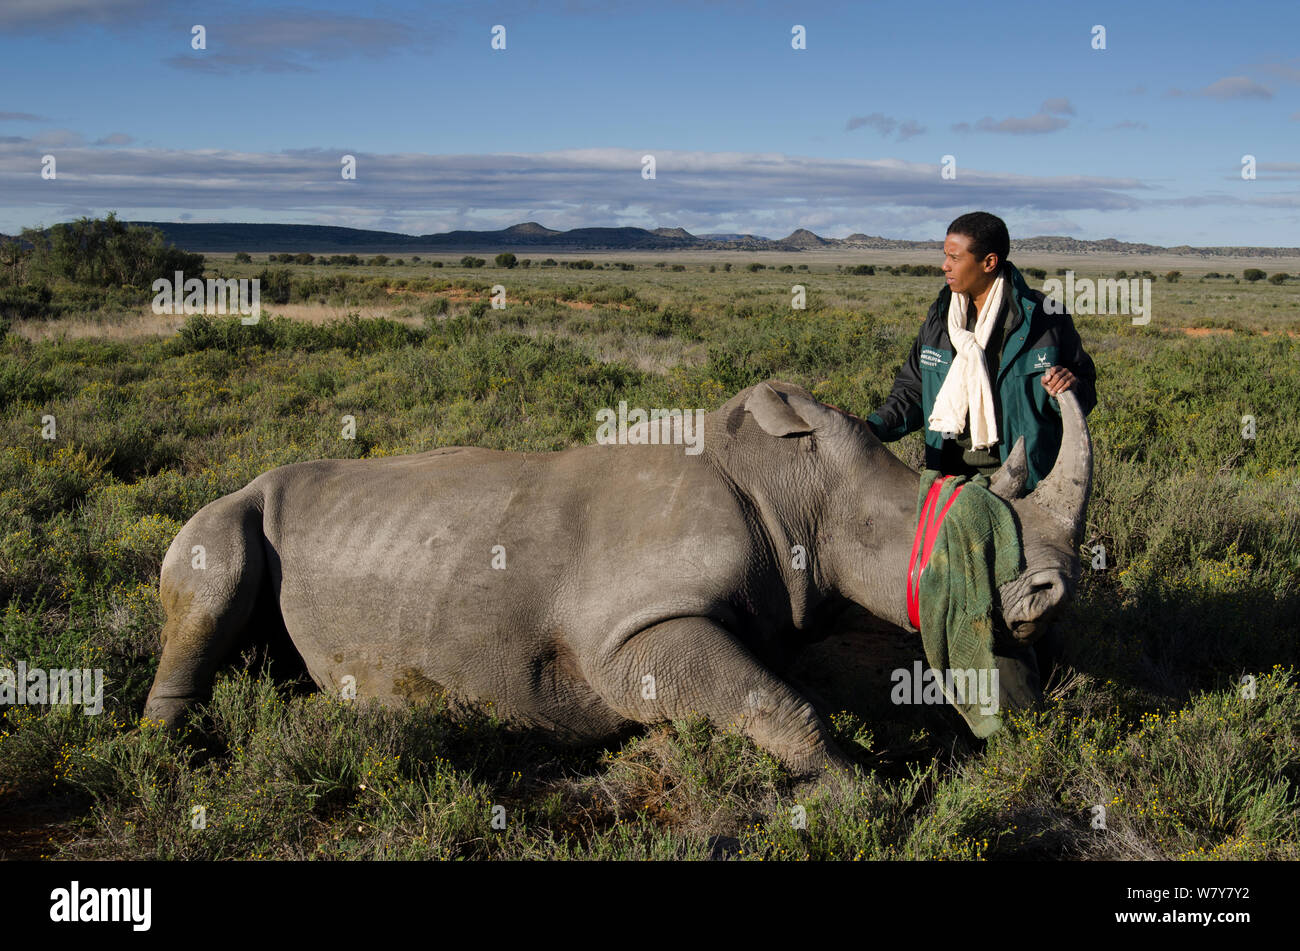 White rhinoceros (Ceratotherium simum) released in Great Karoo from Kruger National Park as part of population management scheme. With Cathy Dreyer of SANParks Veterinary Services. Private Reserve, South Africa. Endangered species. Stock Photo